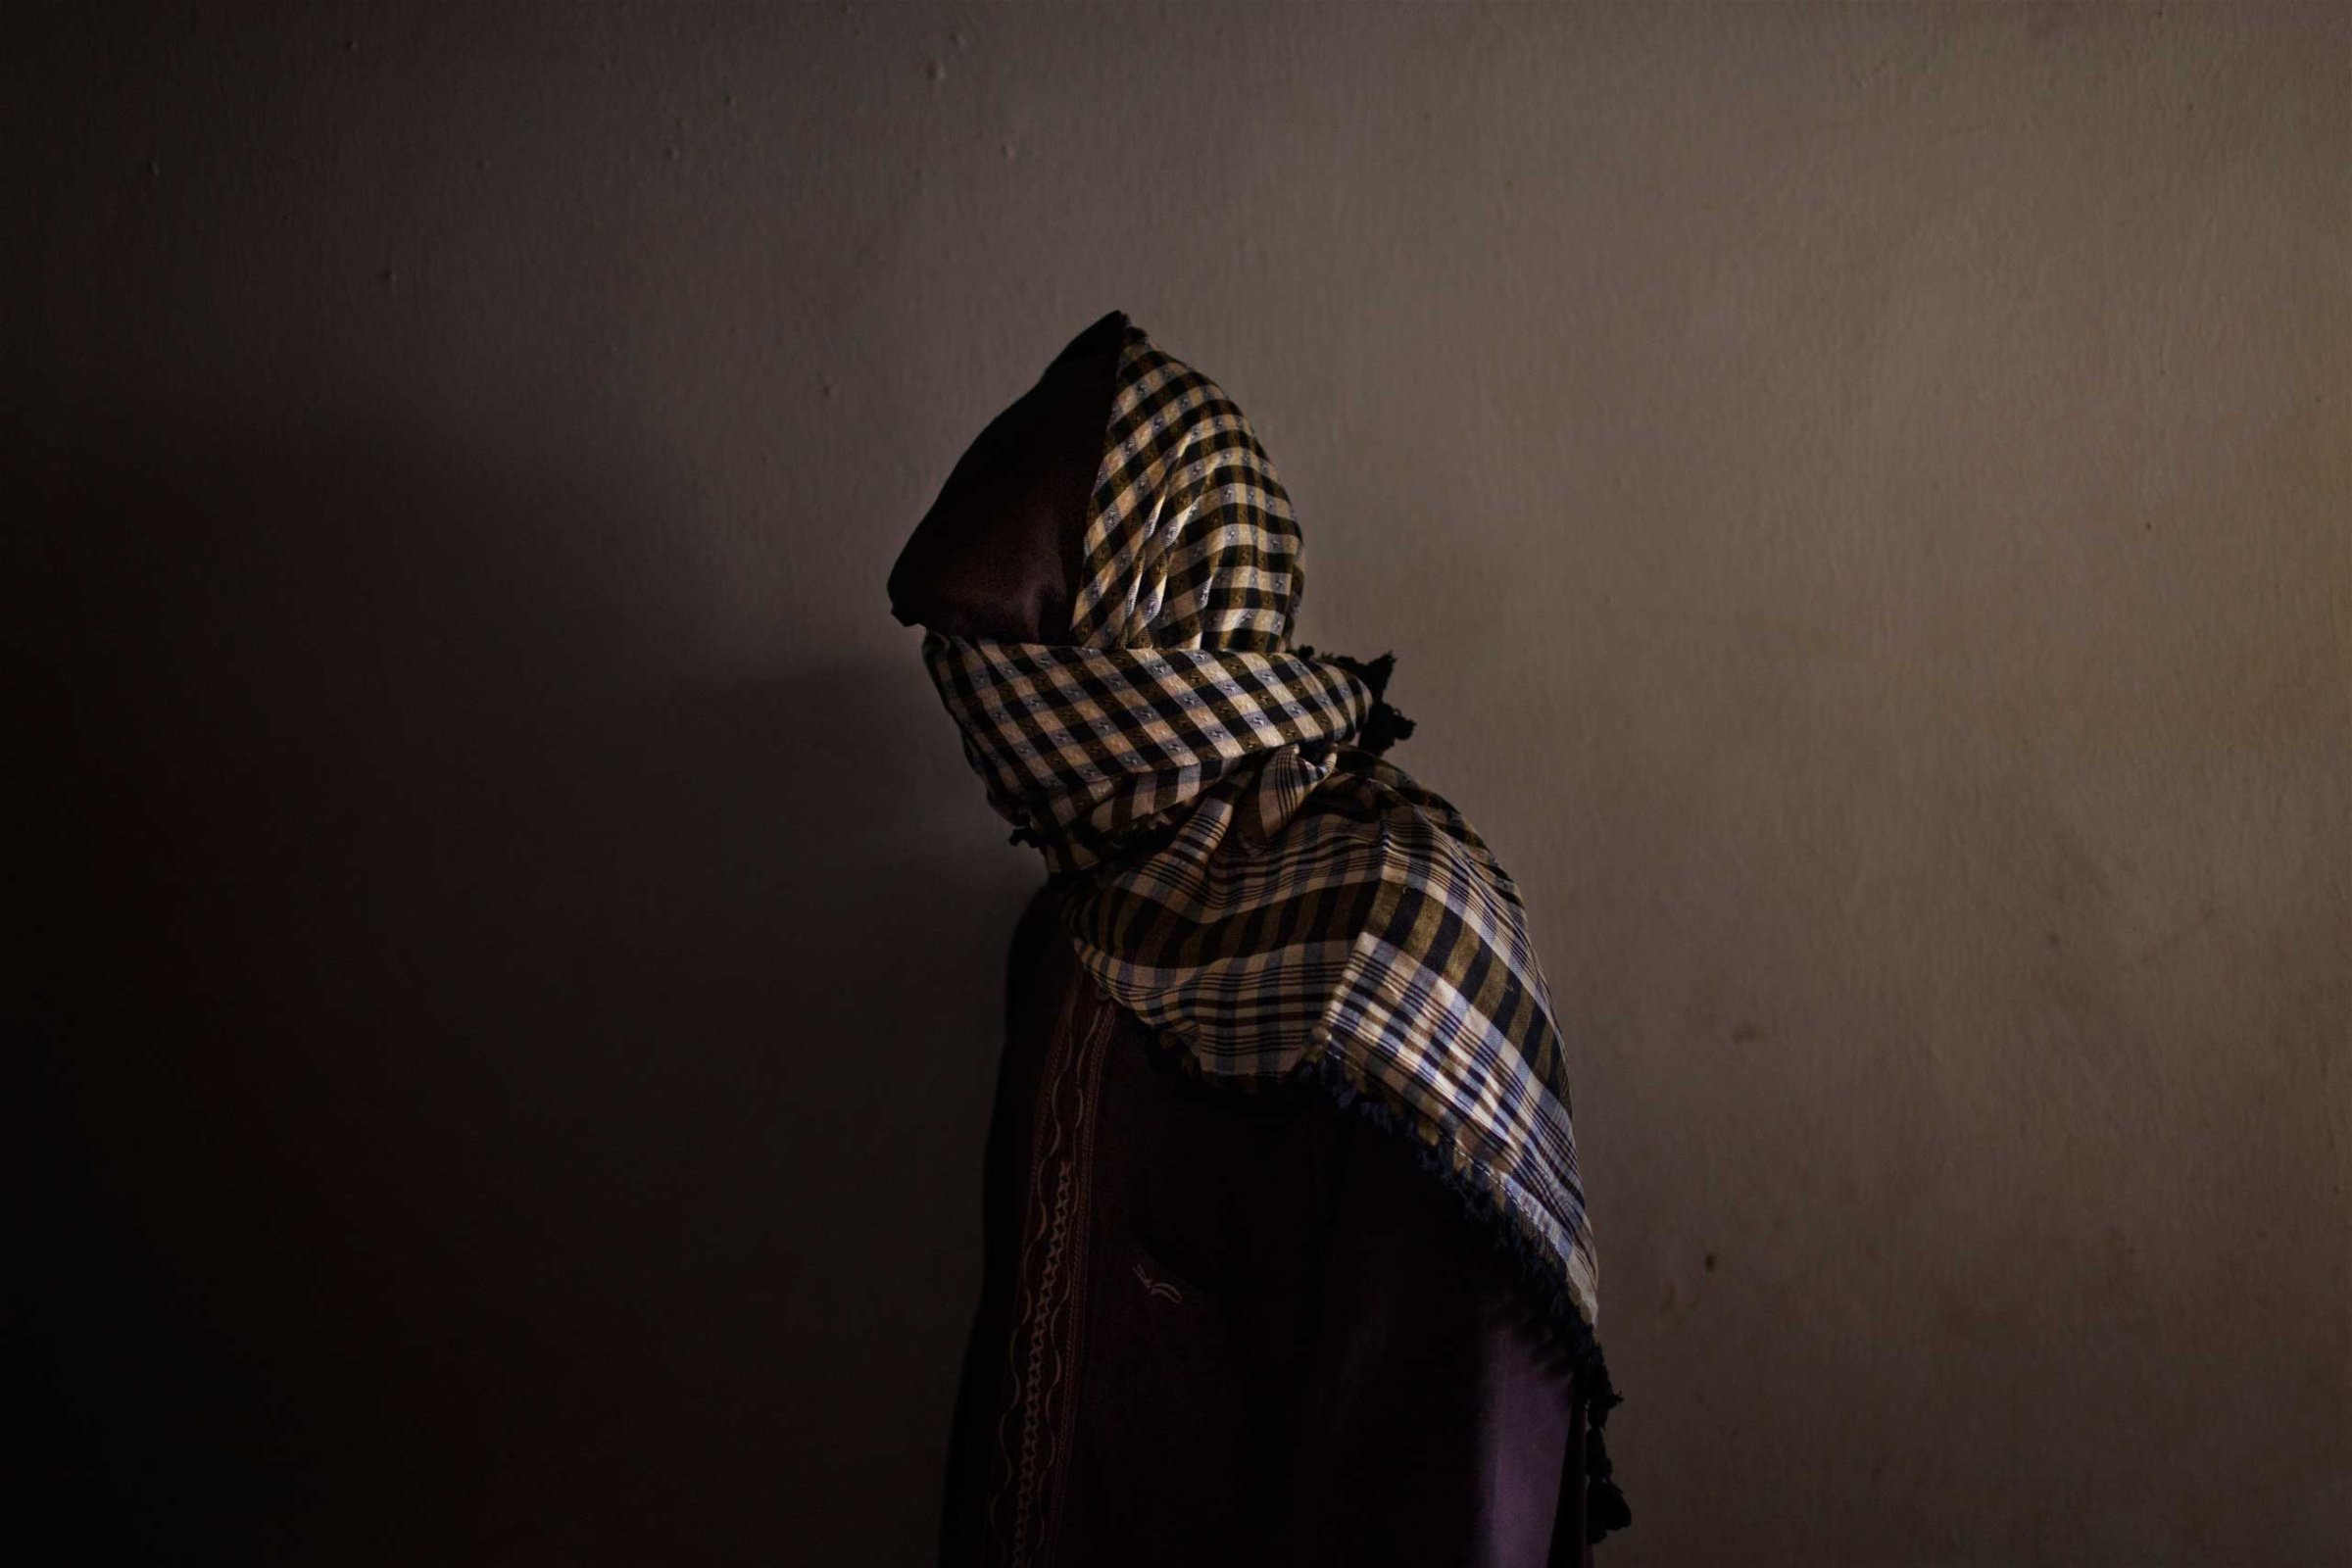 A member of Boko Haram seen in a suburb of Kano, Nigeria, in 2012.